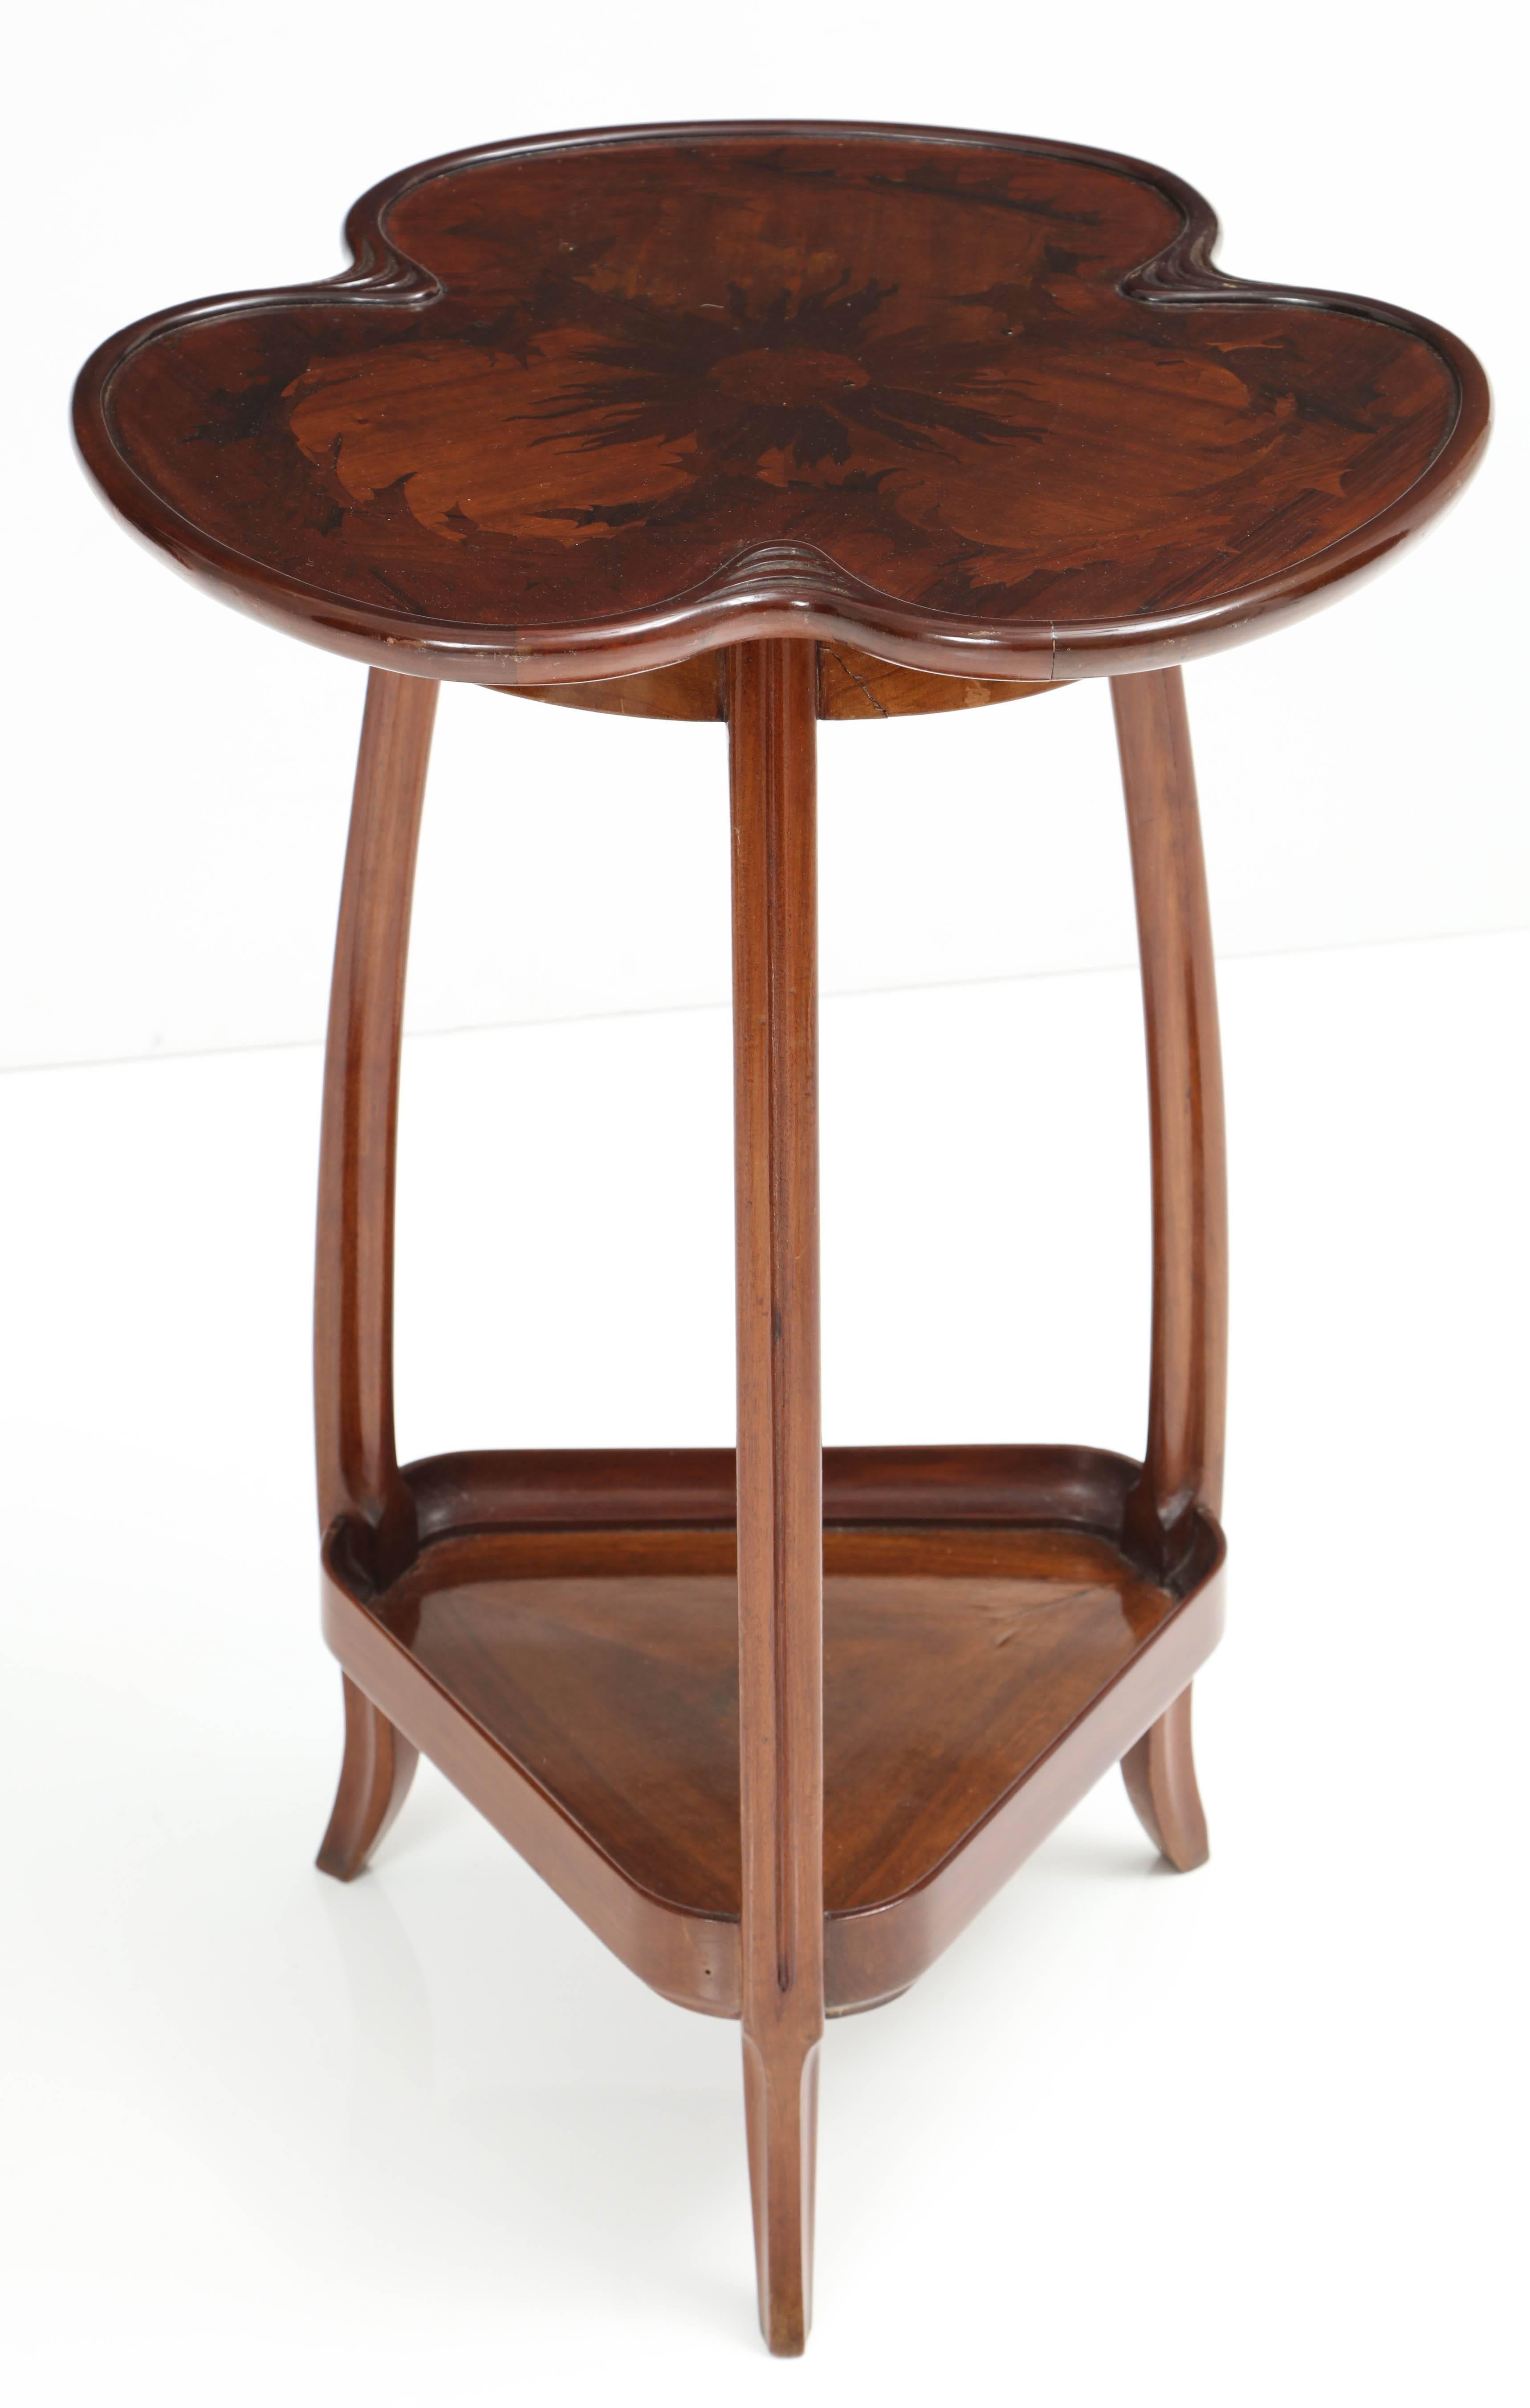 Cloverleaf shape for this Art Nouveau two tray gueridon table in rosewood and mahogany.
Elegant legs, refined details around the top.